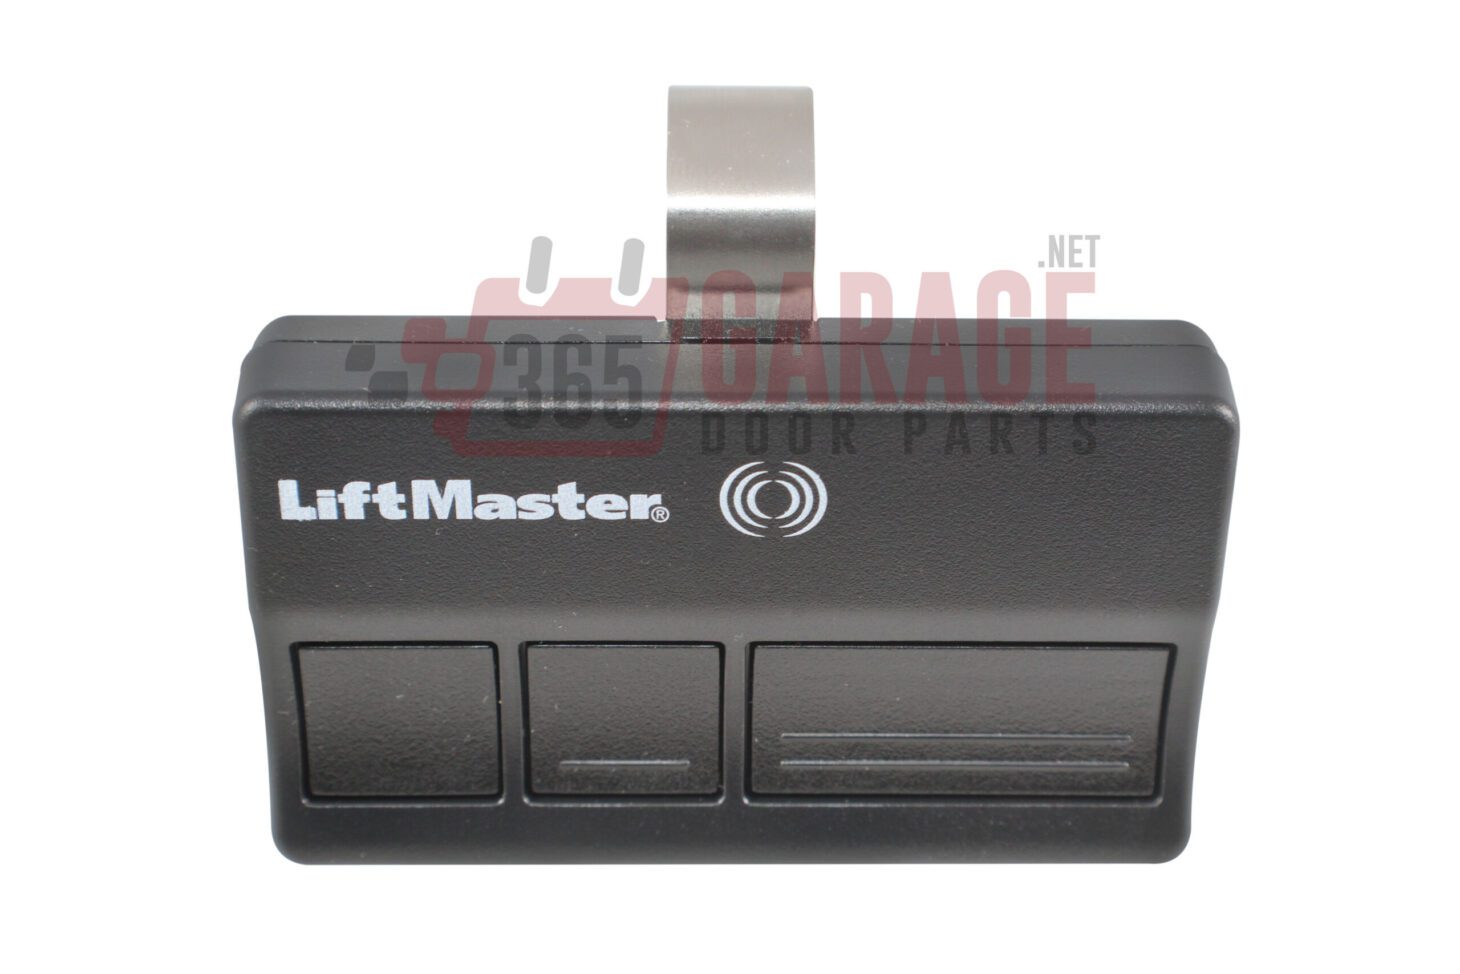 Liftmaster 373LM Security+ 3 Button Garage Door Opener Remote Control - 373lm 2  2 ScaleD